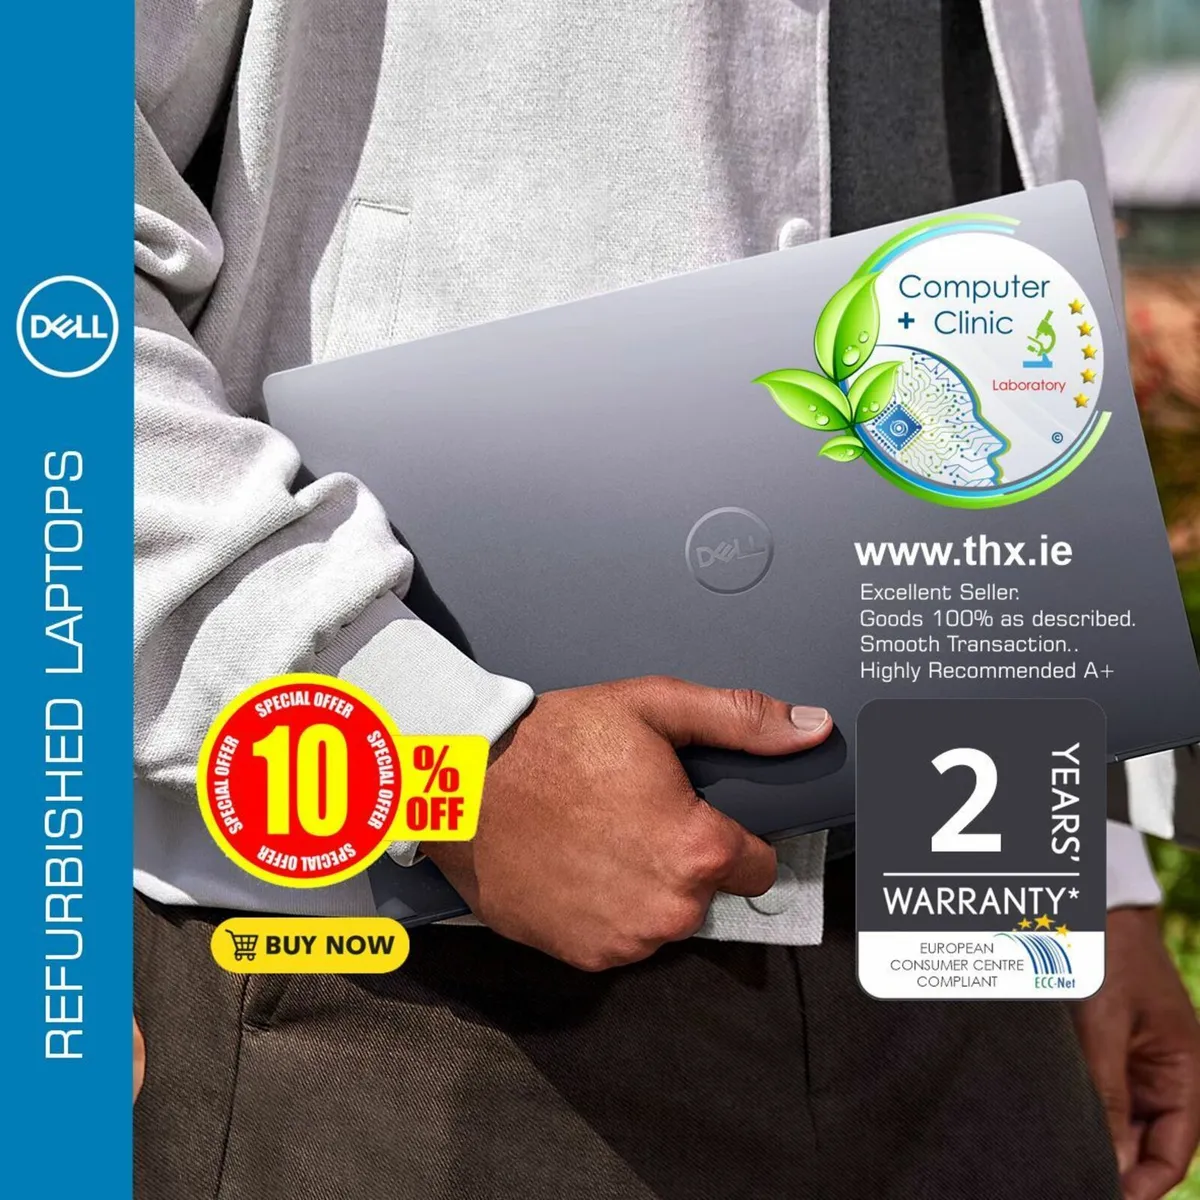 DELL LAPTOPS ON SALE》 GET 10% DISCOUNT